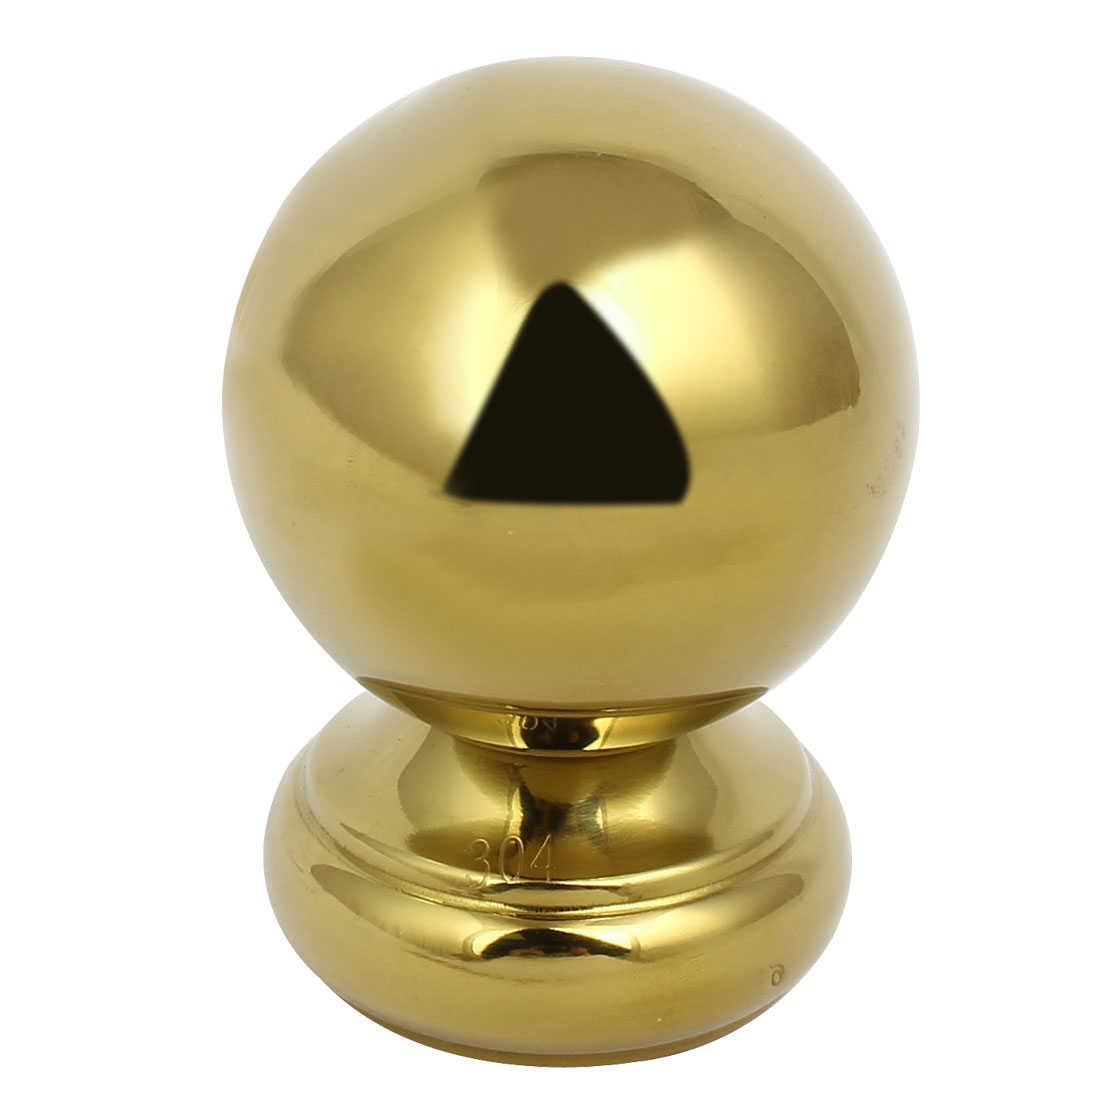 51mm Ball Top Cap 201 Stainless Steel Gold Tone for Stair Newel Fence Post